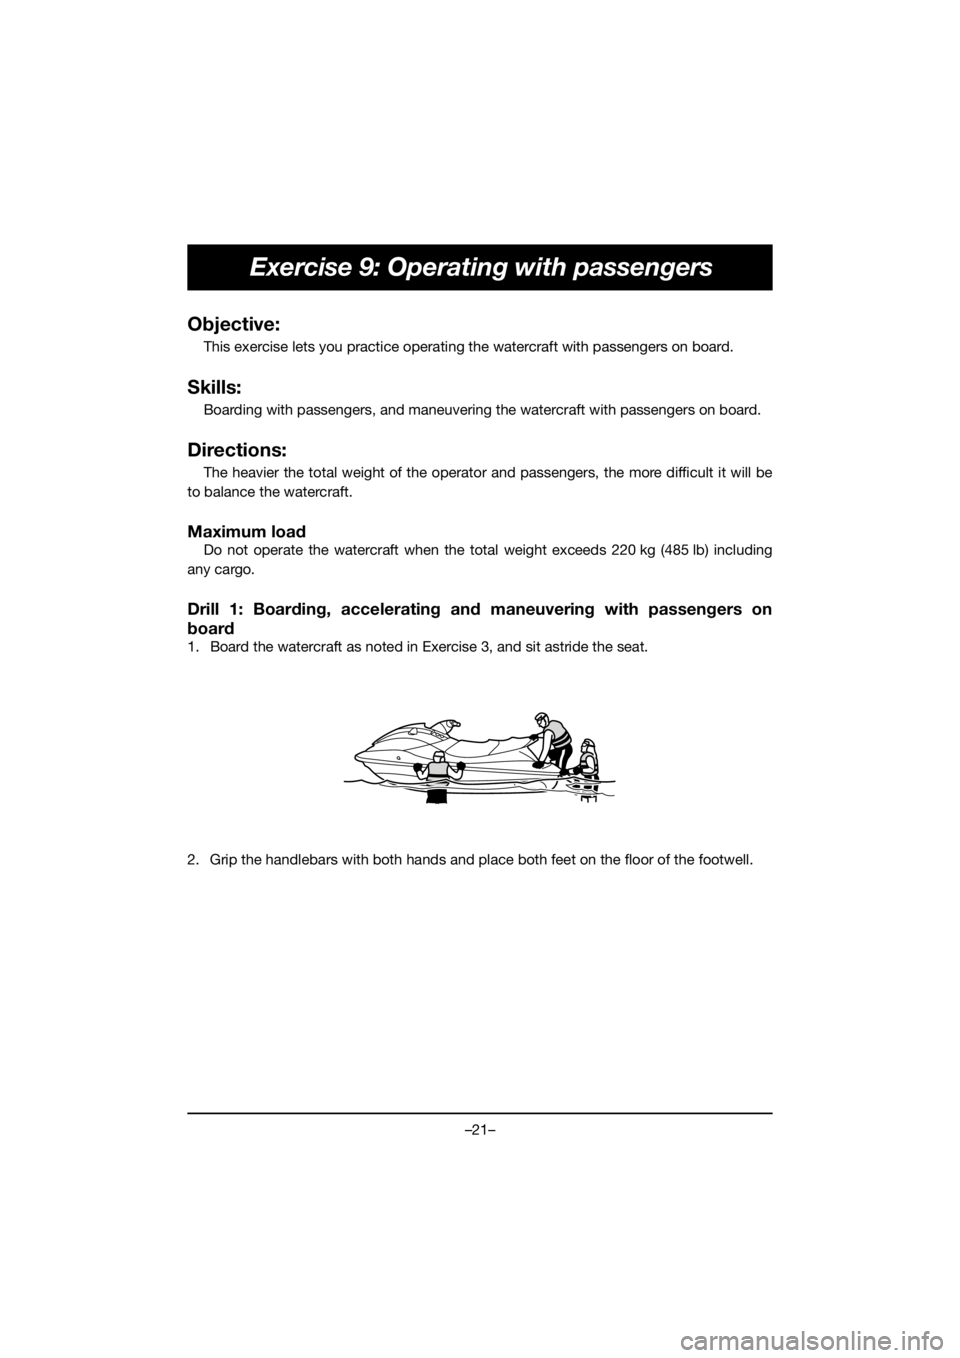 YAMAHA EXR 2020  Notices Demploi (in French) –21–
Exercise 9: Operating with passengers
Objective:
This exercise lets you practice operating the watercraft with passengers on board.
Skills:
Boarding with passengers, and maneuvering the water